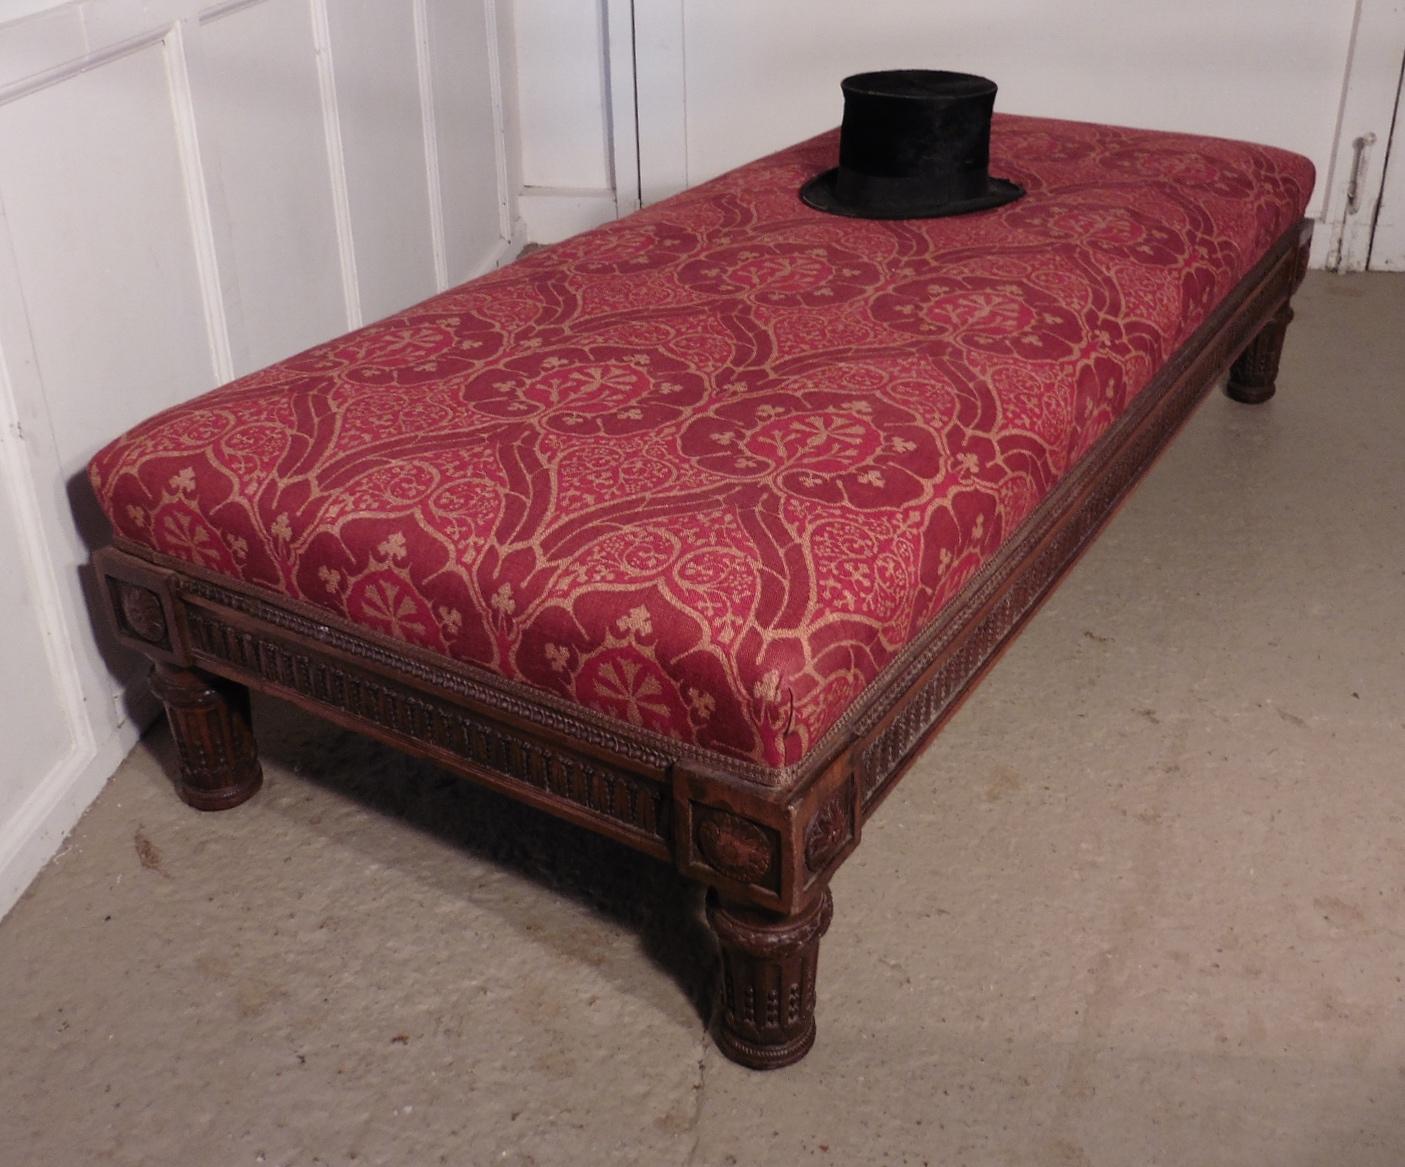 Mahogany Charming 19th Century Upholstered Window Seat or Day Bed